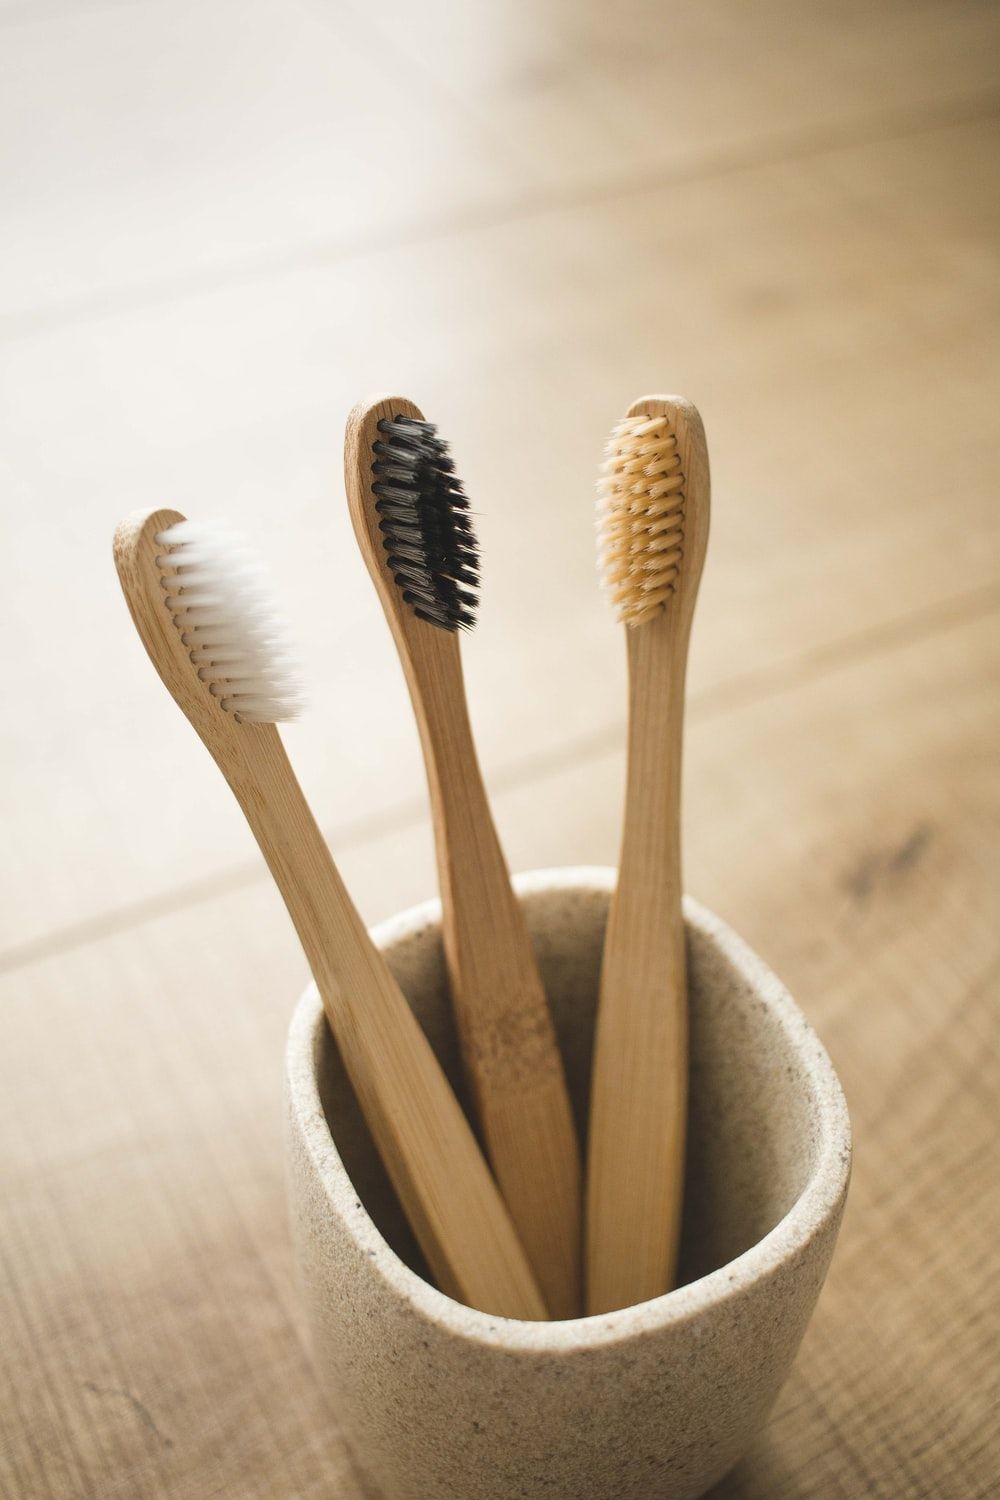 Toothbrush Picture. Download Free Image